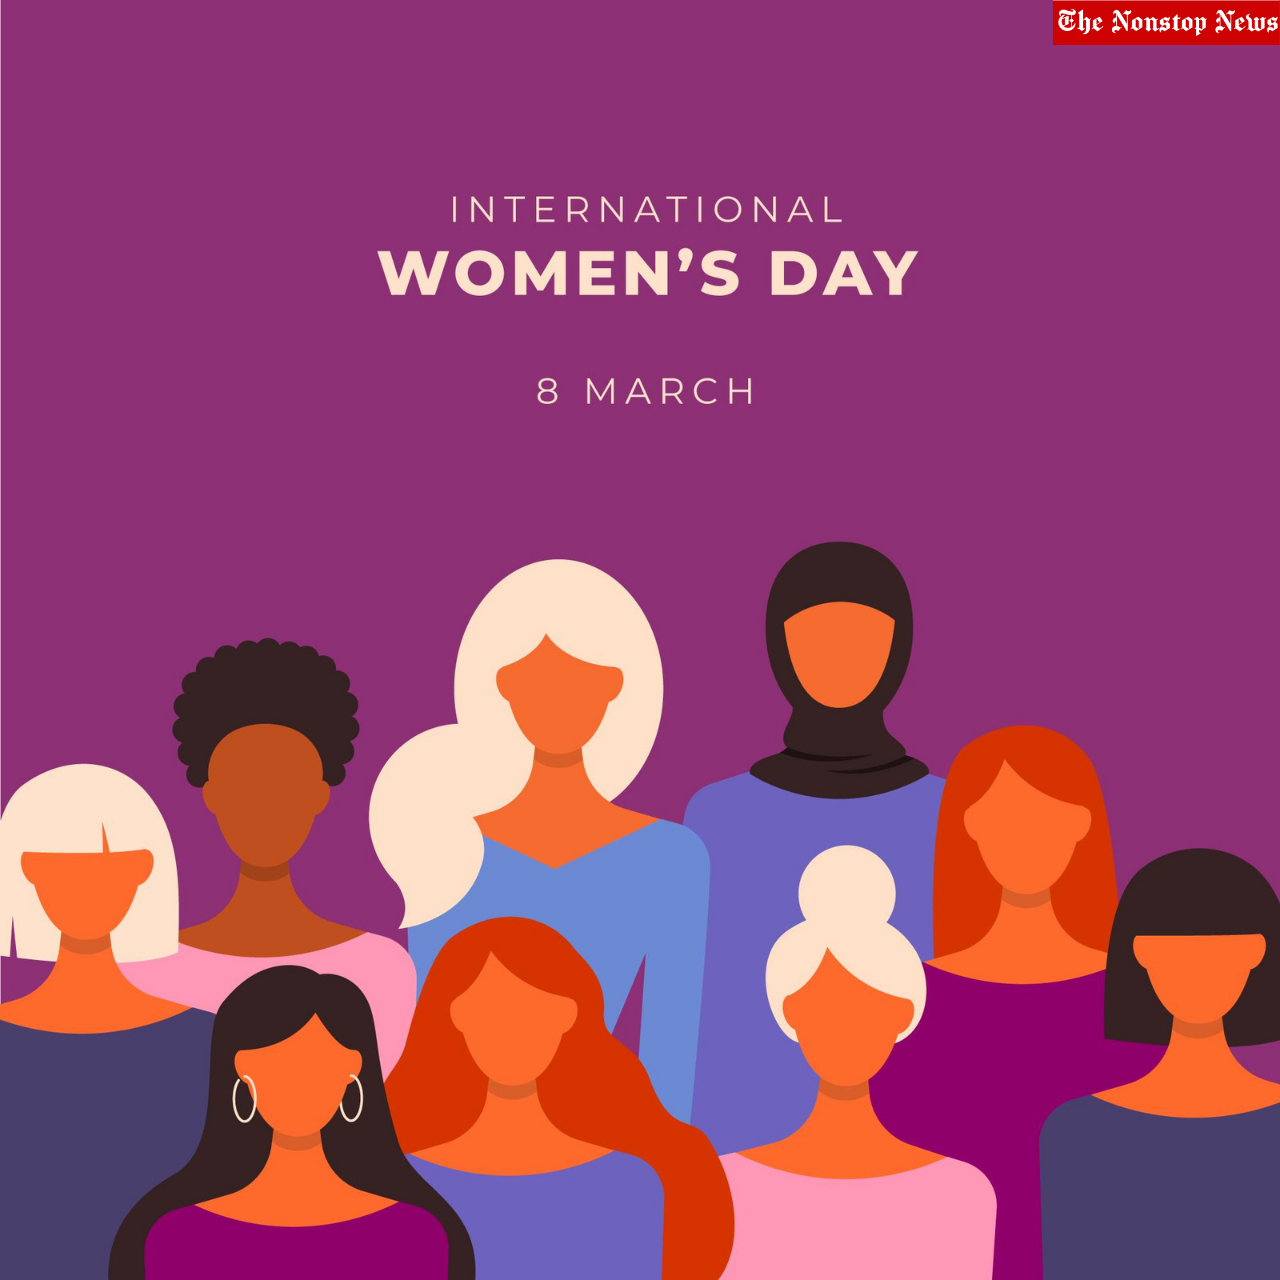 International Women's Day 2022 Instagram Captions, WhatsApp Messages, Twitter Images, WhatsApp Stickers, Social Media Posts to Share